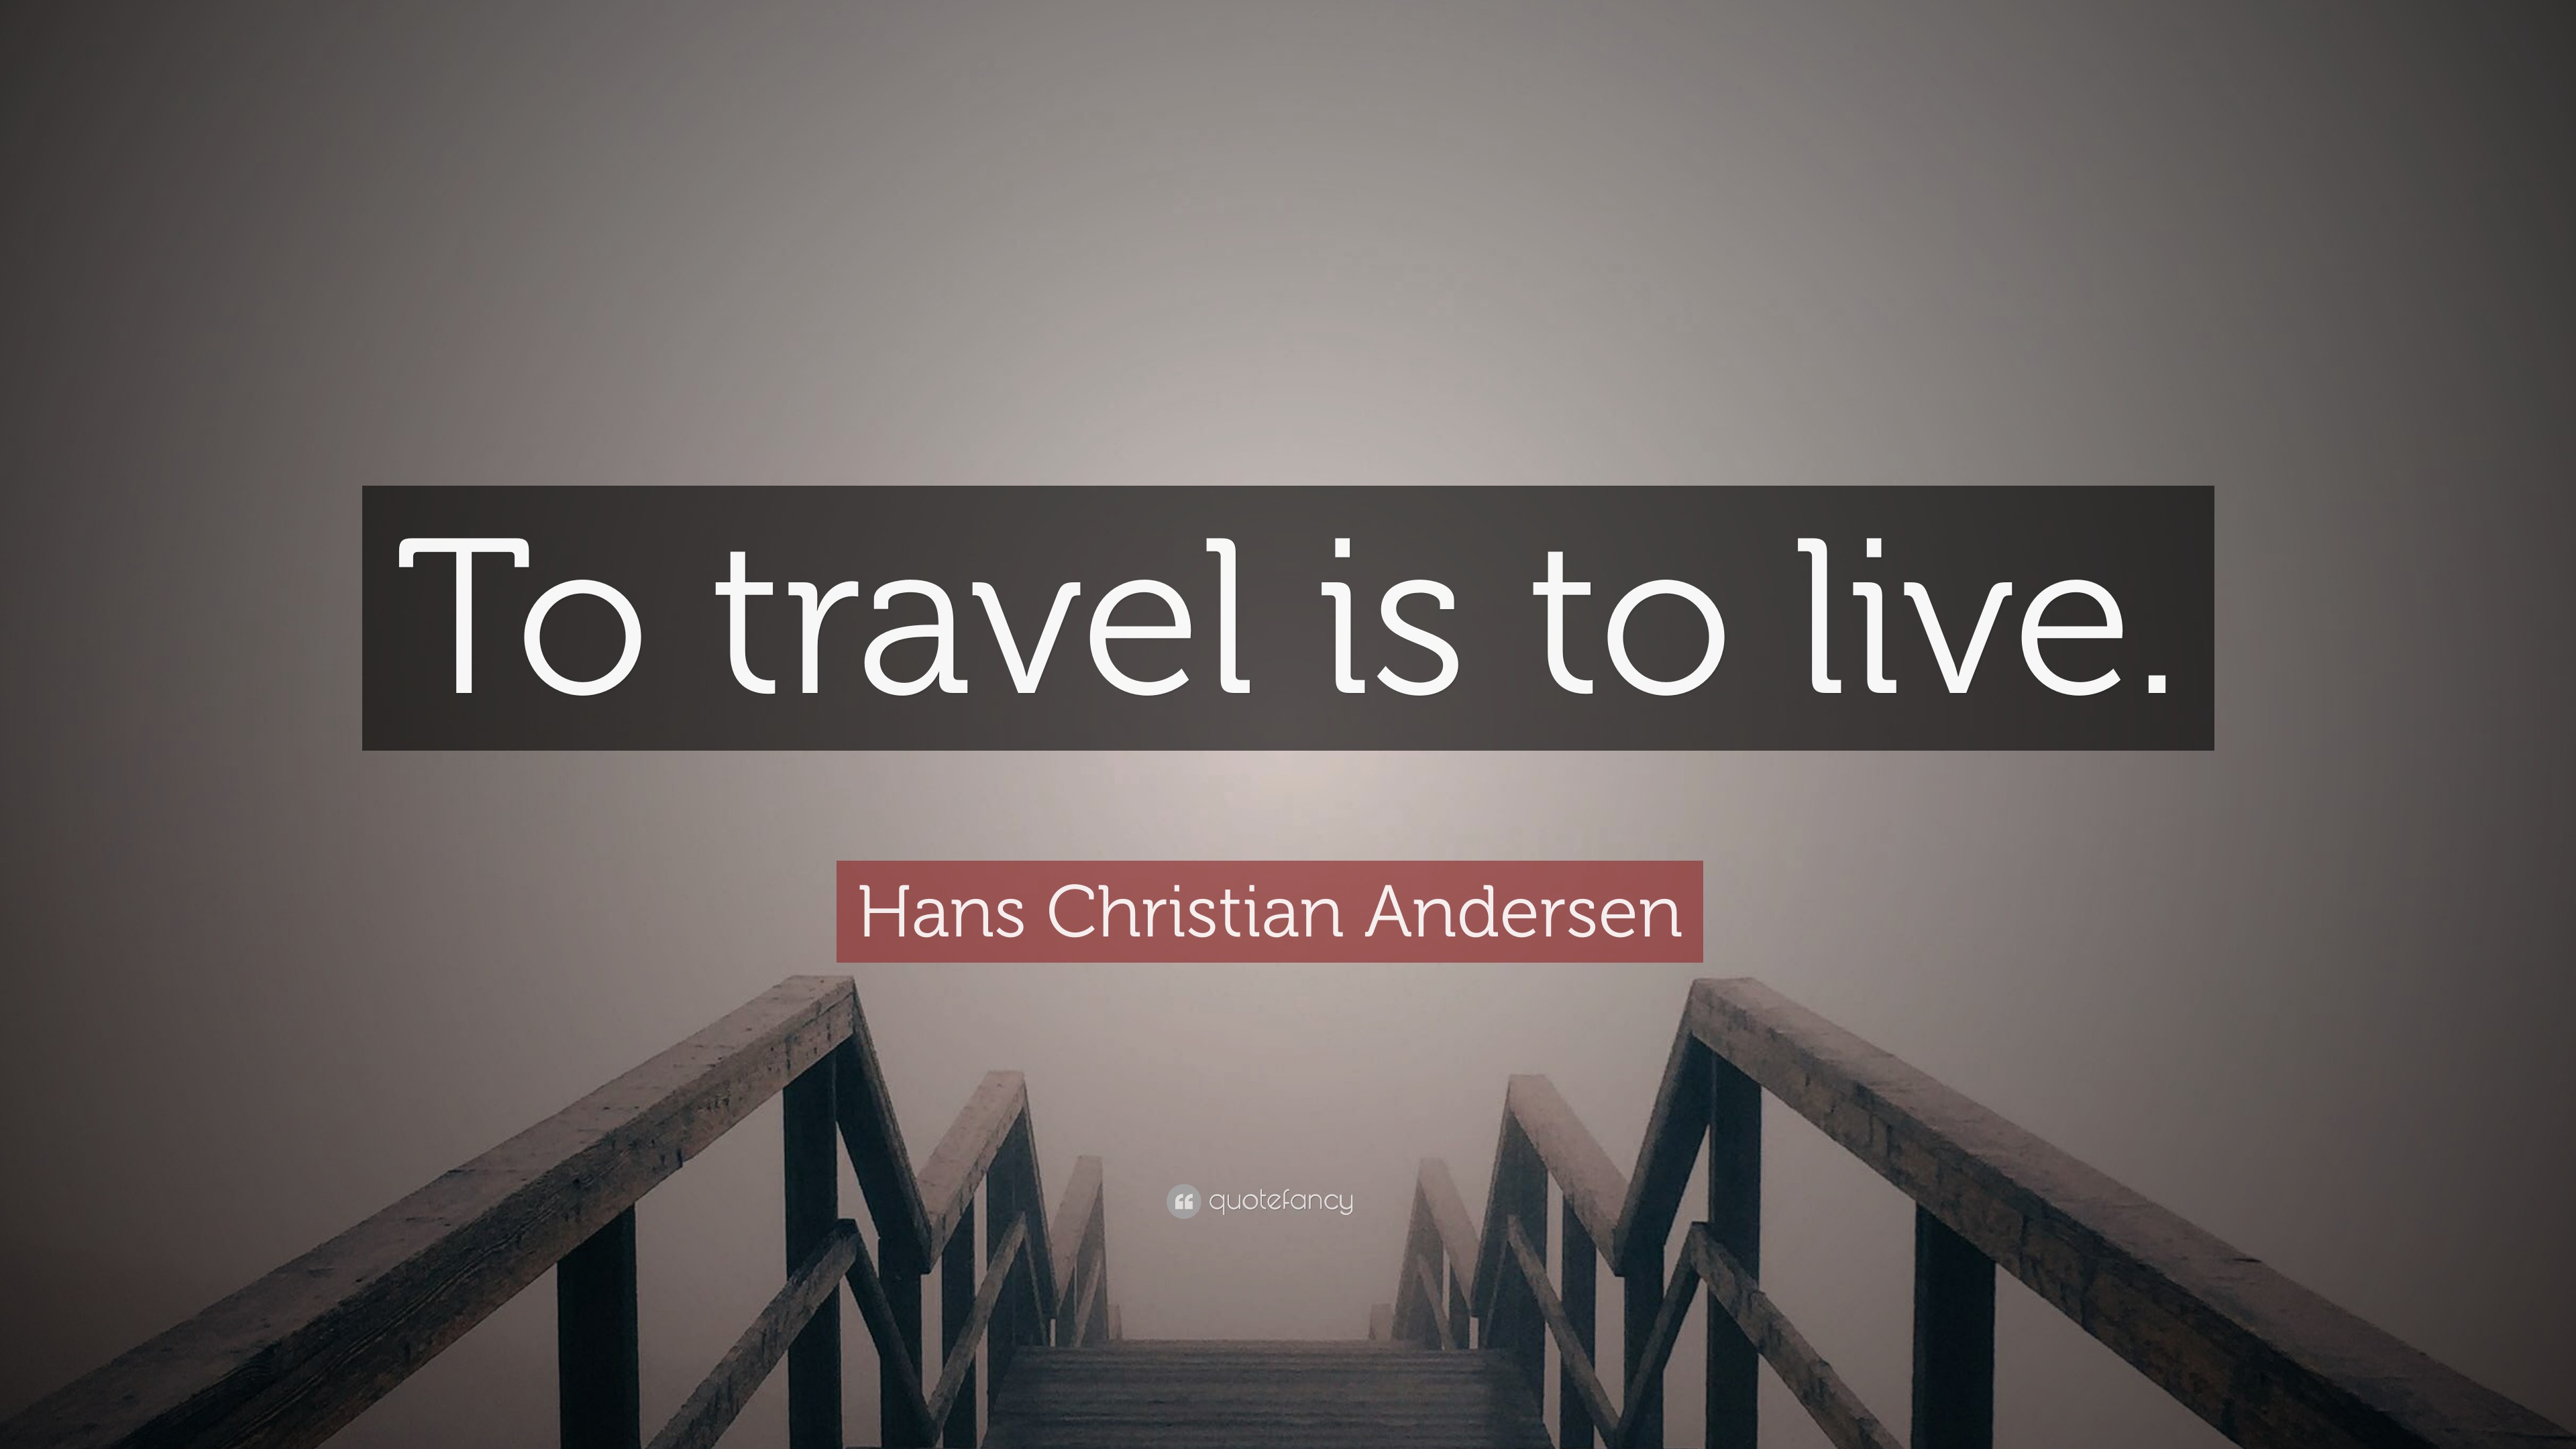 Hans Christian Andersen Quote: “To travel is to live.” (12 wallpapers